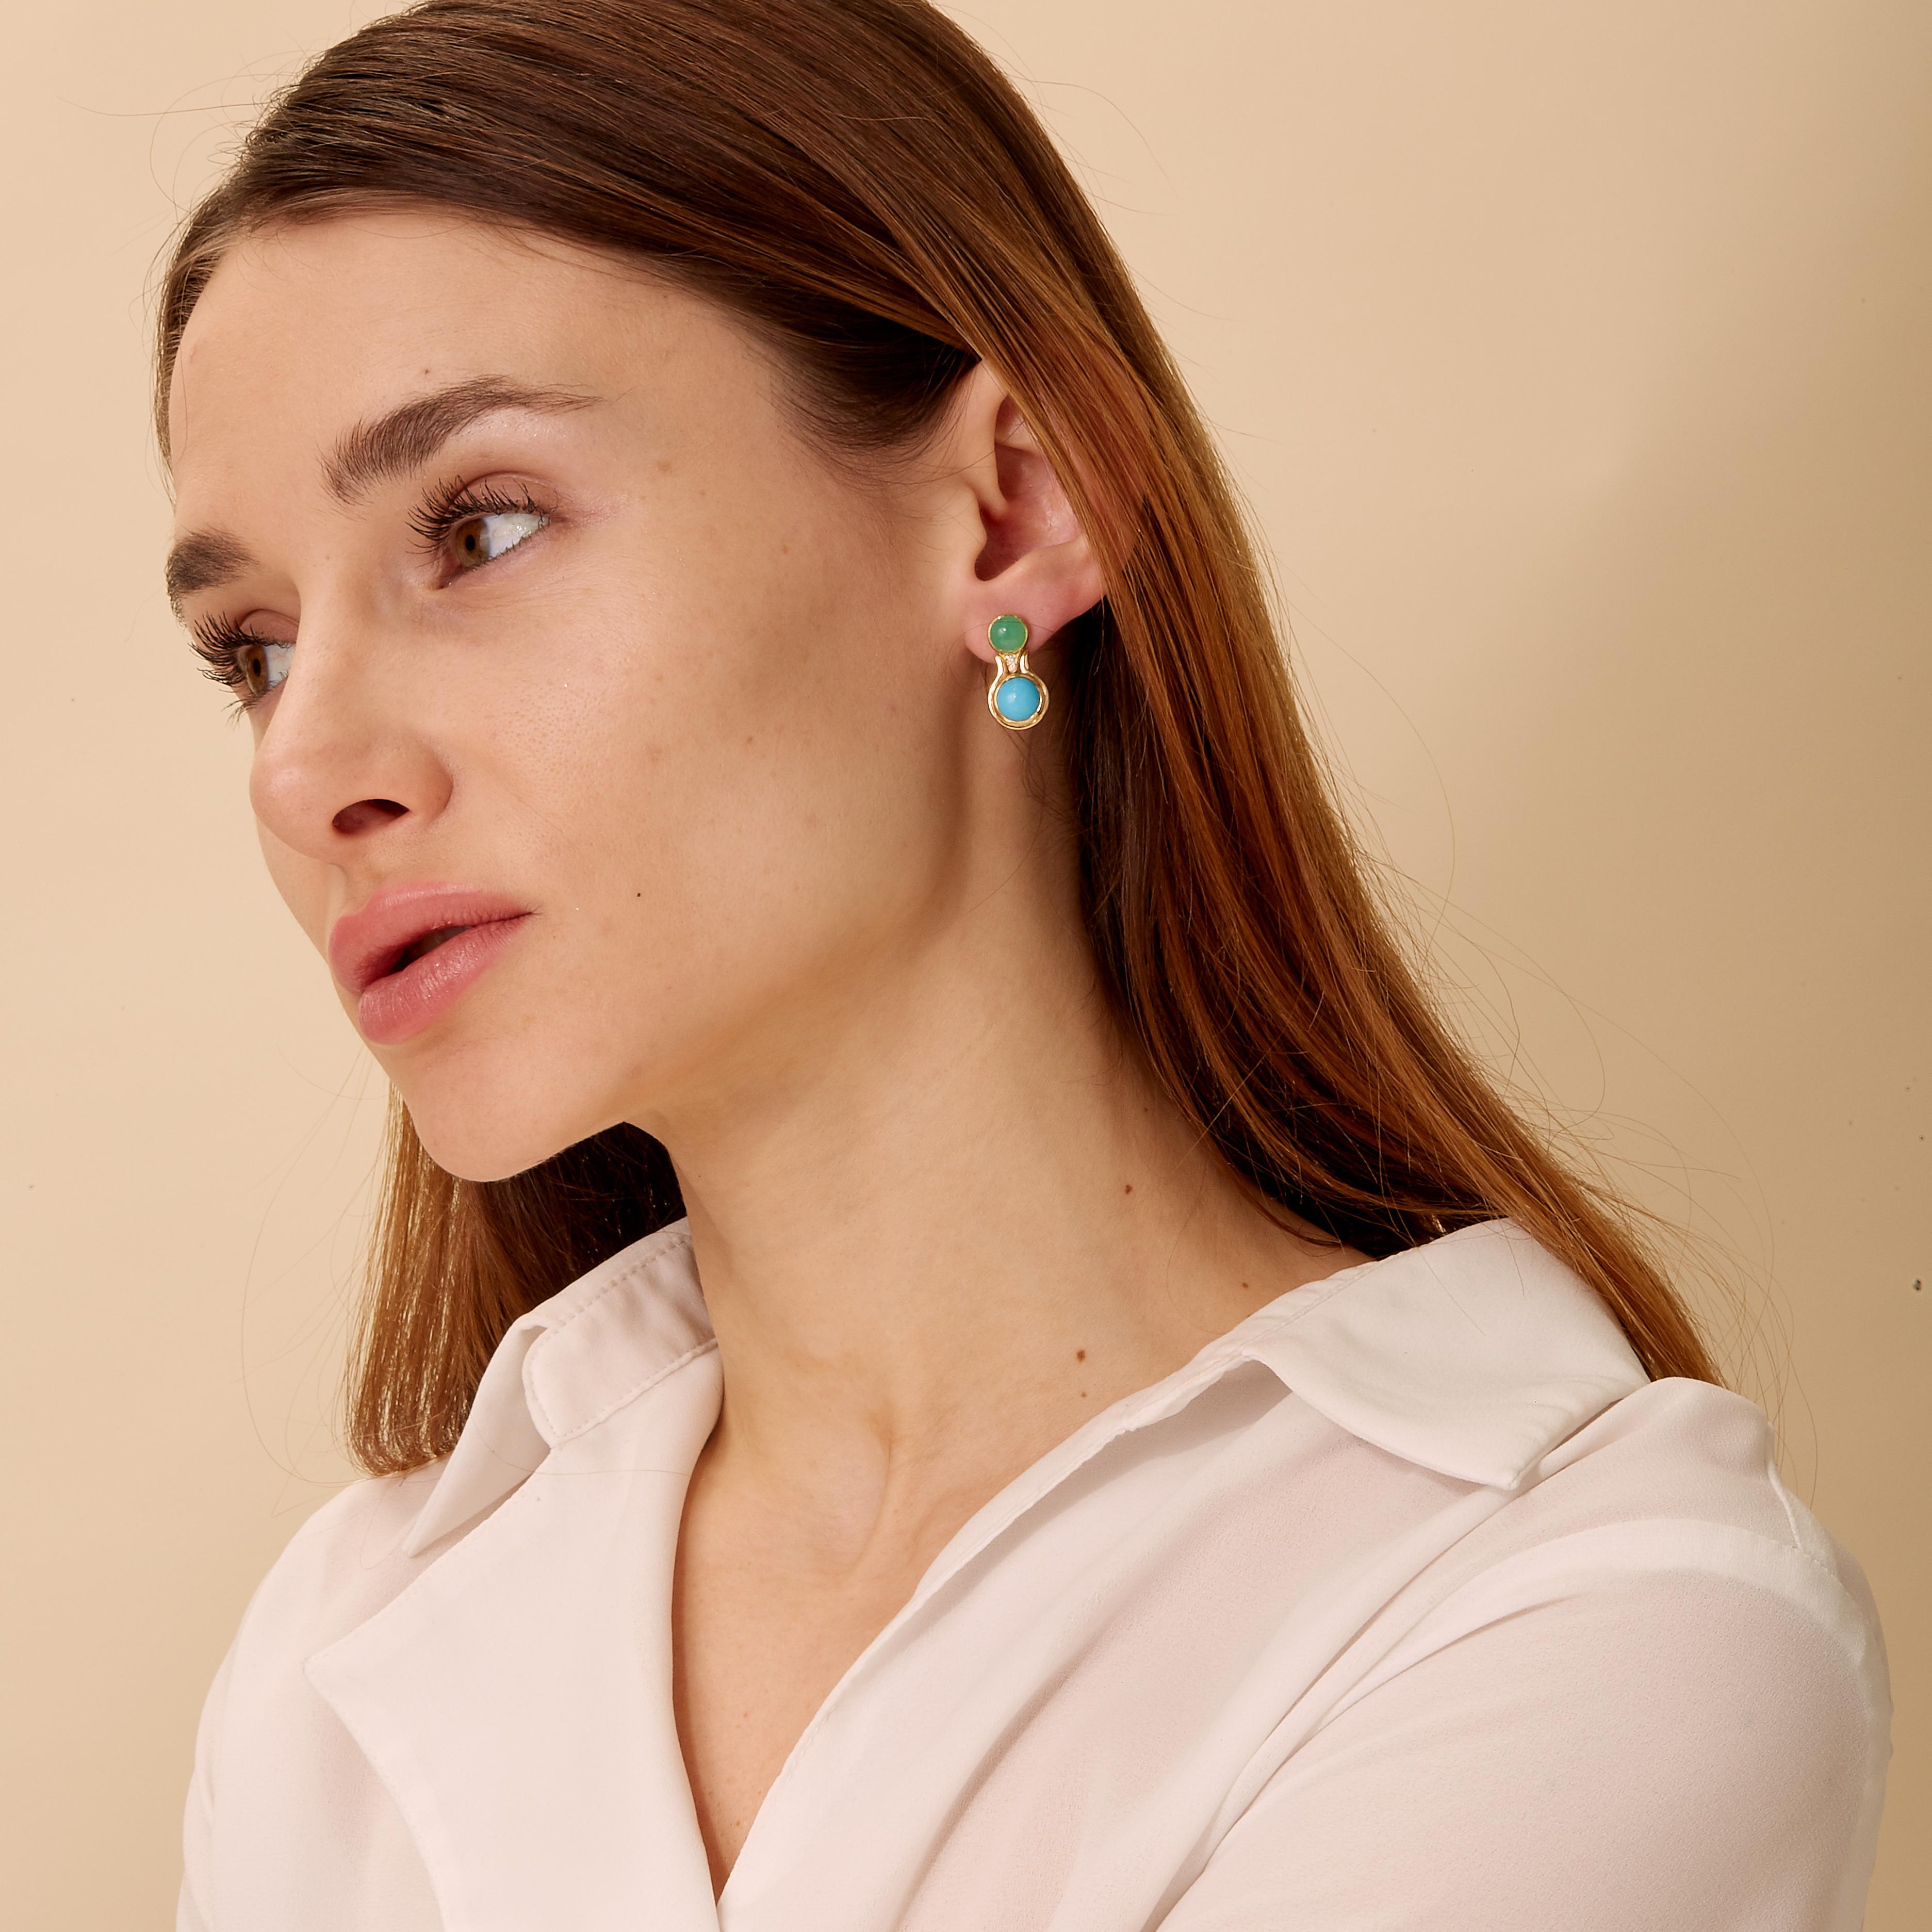 Created in 18 karat yellow gold
Chrysoprase 2.50 carats approx.
Turquoise 3 carats approx.
Diamonds 0.03 carat approx.
18kyg Butterfly backs
Limited Edition


Exquisitely crafted from 18 karat yellow gold, these limited edition earrings feature